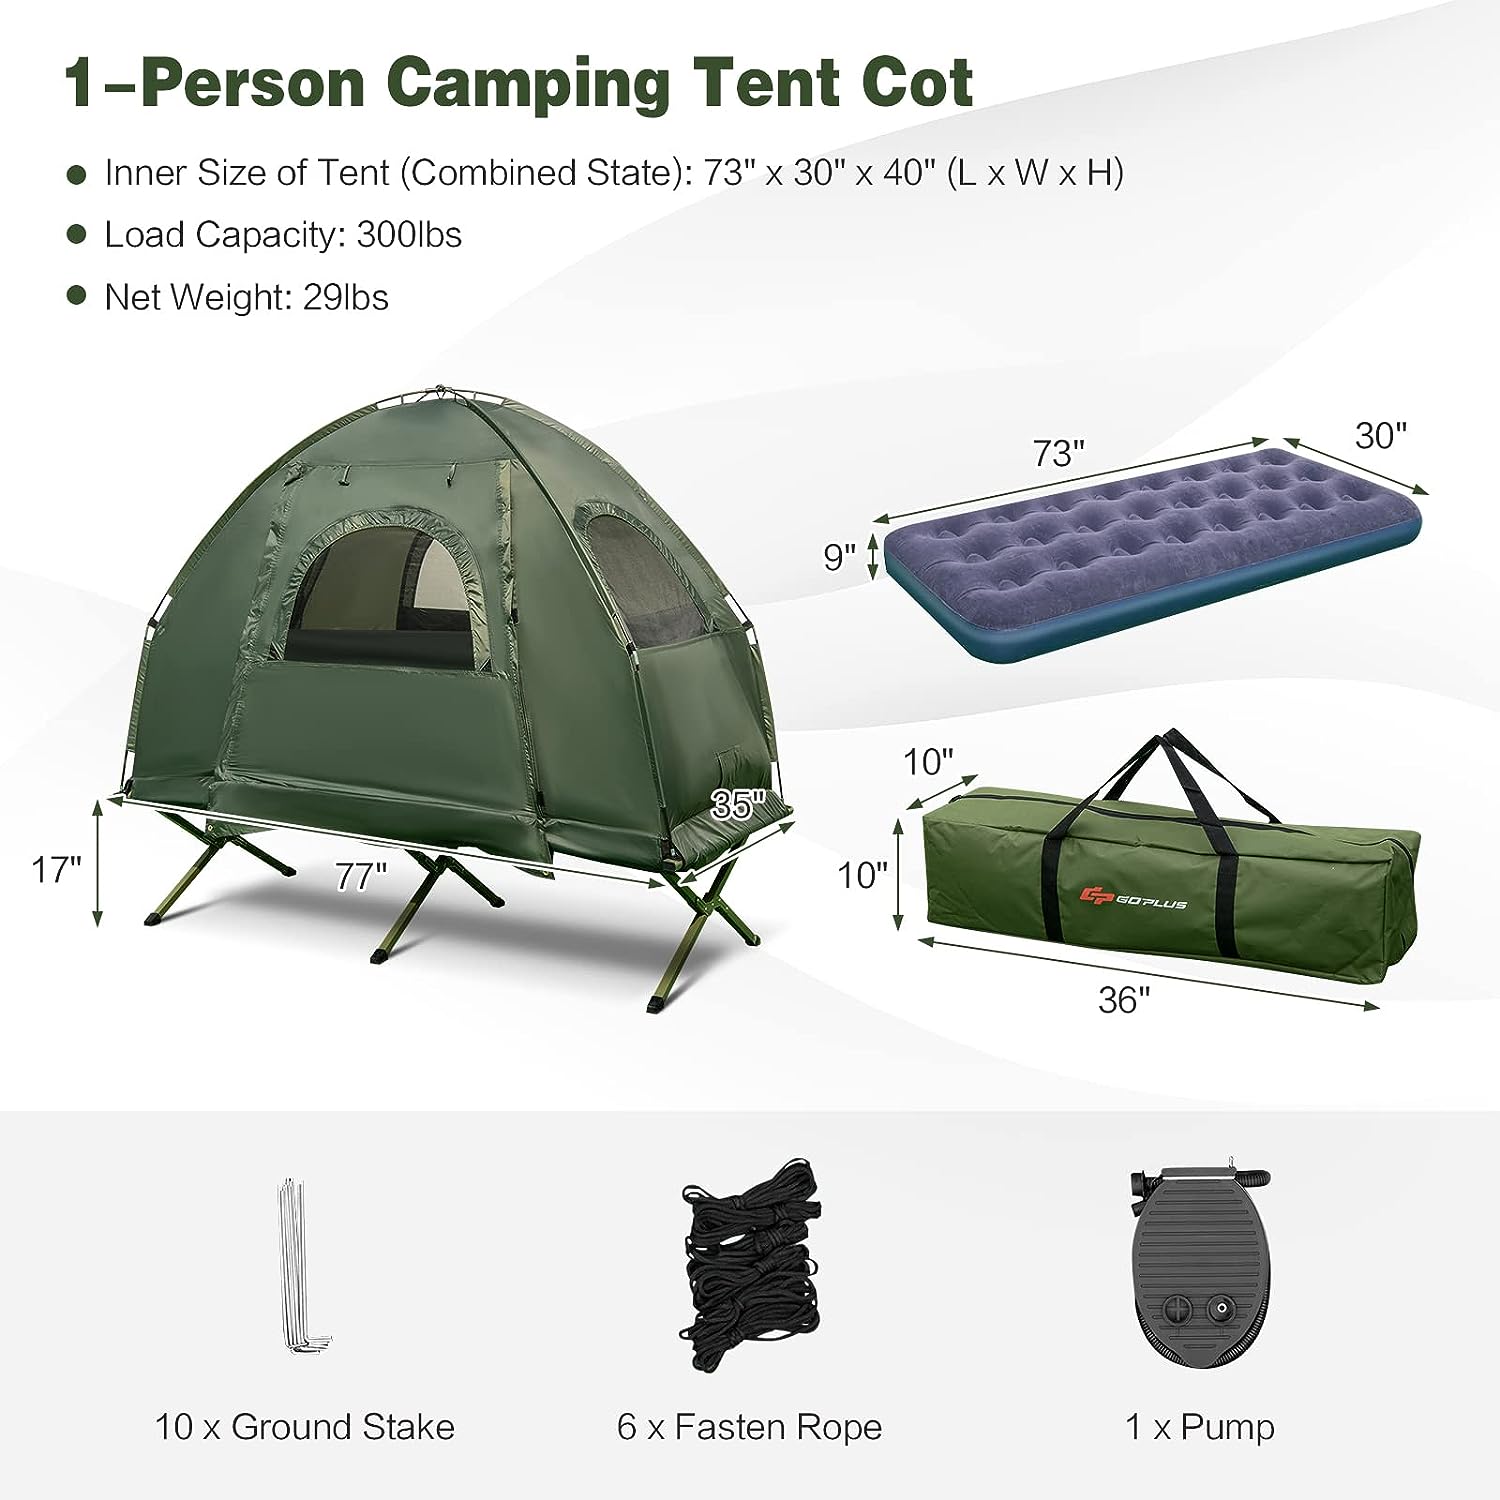 nightcore 1 person cot tent package